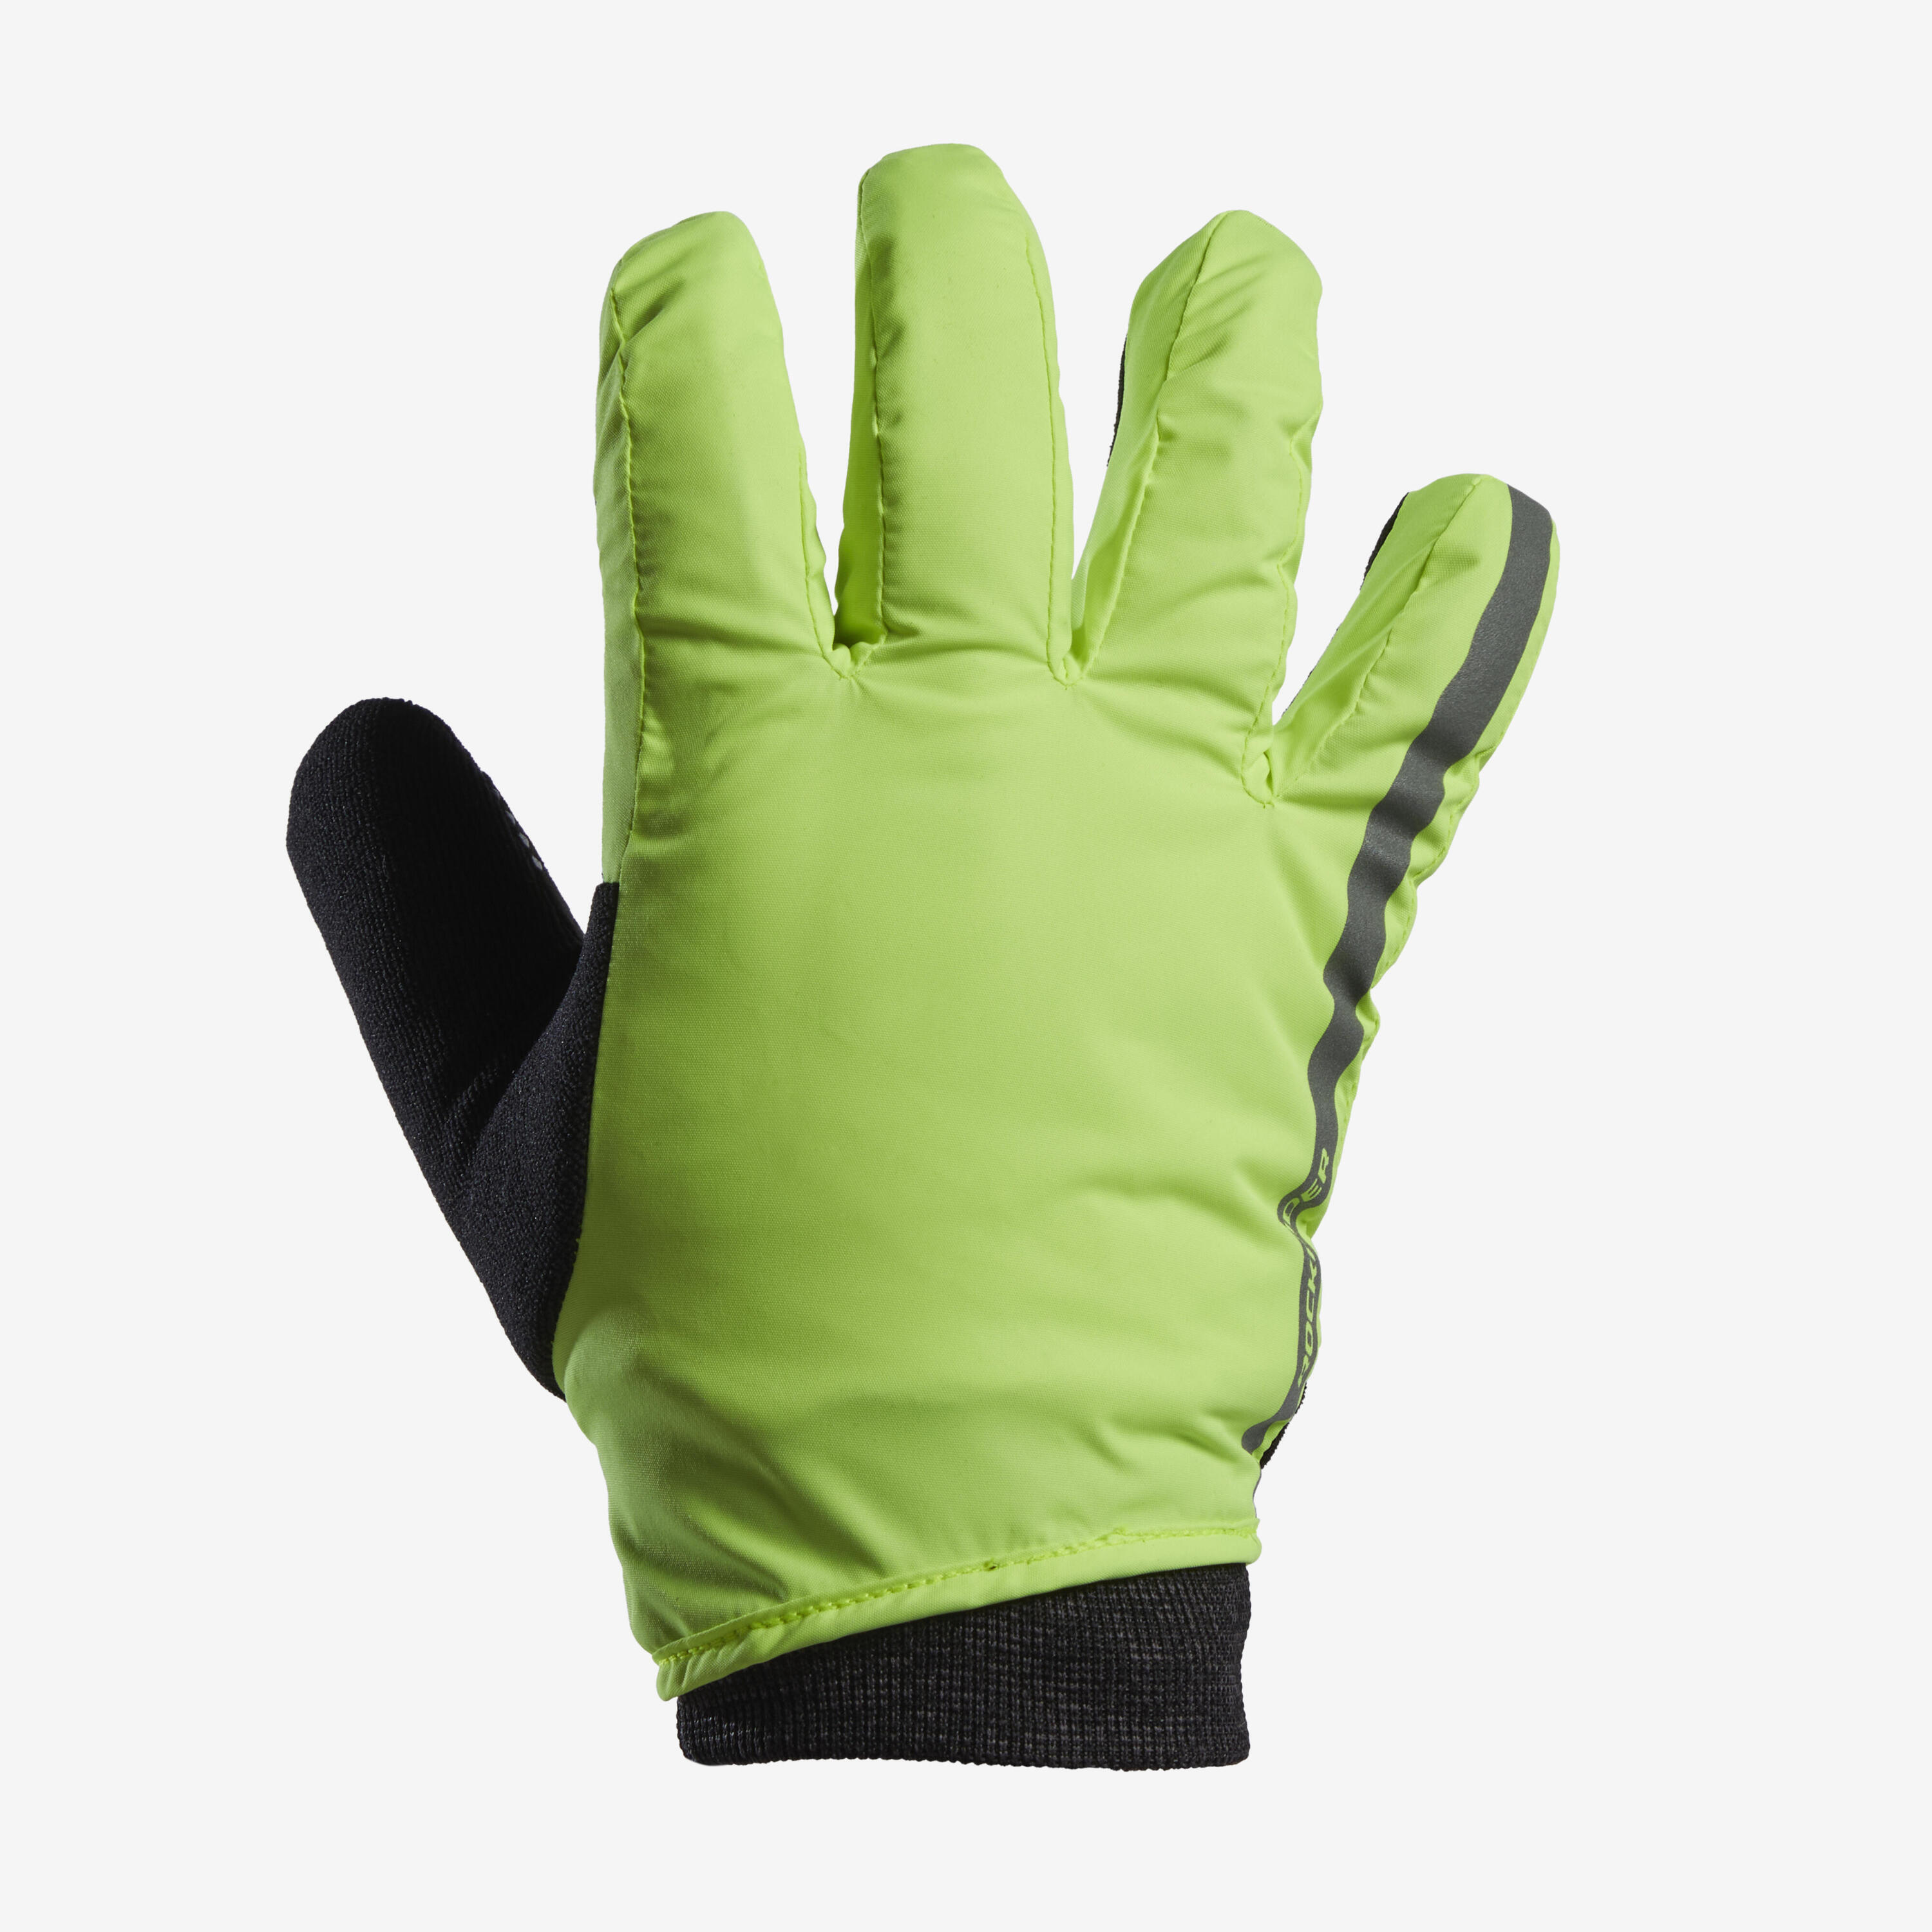 Kids' Winter Cycling Gloves 500 - Neon Yellow 2/5